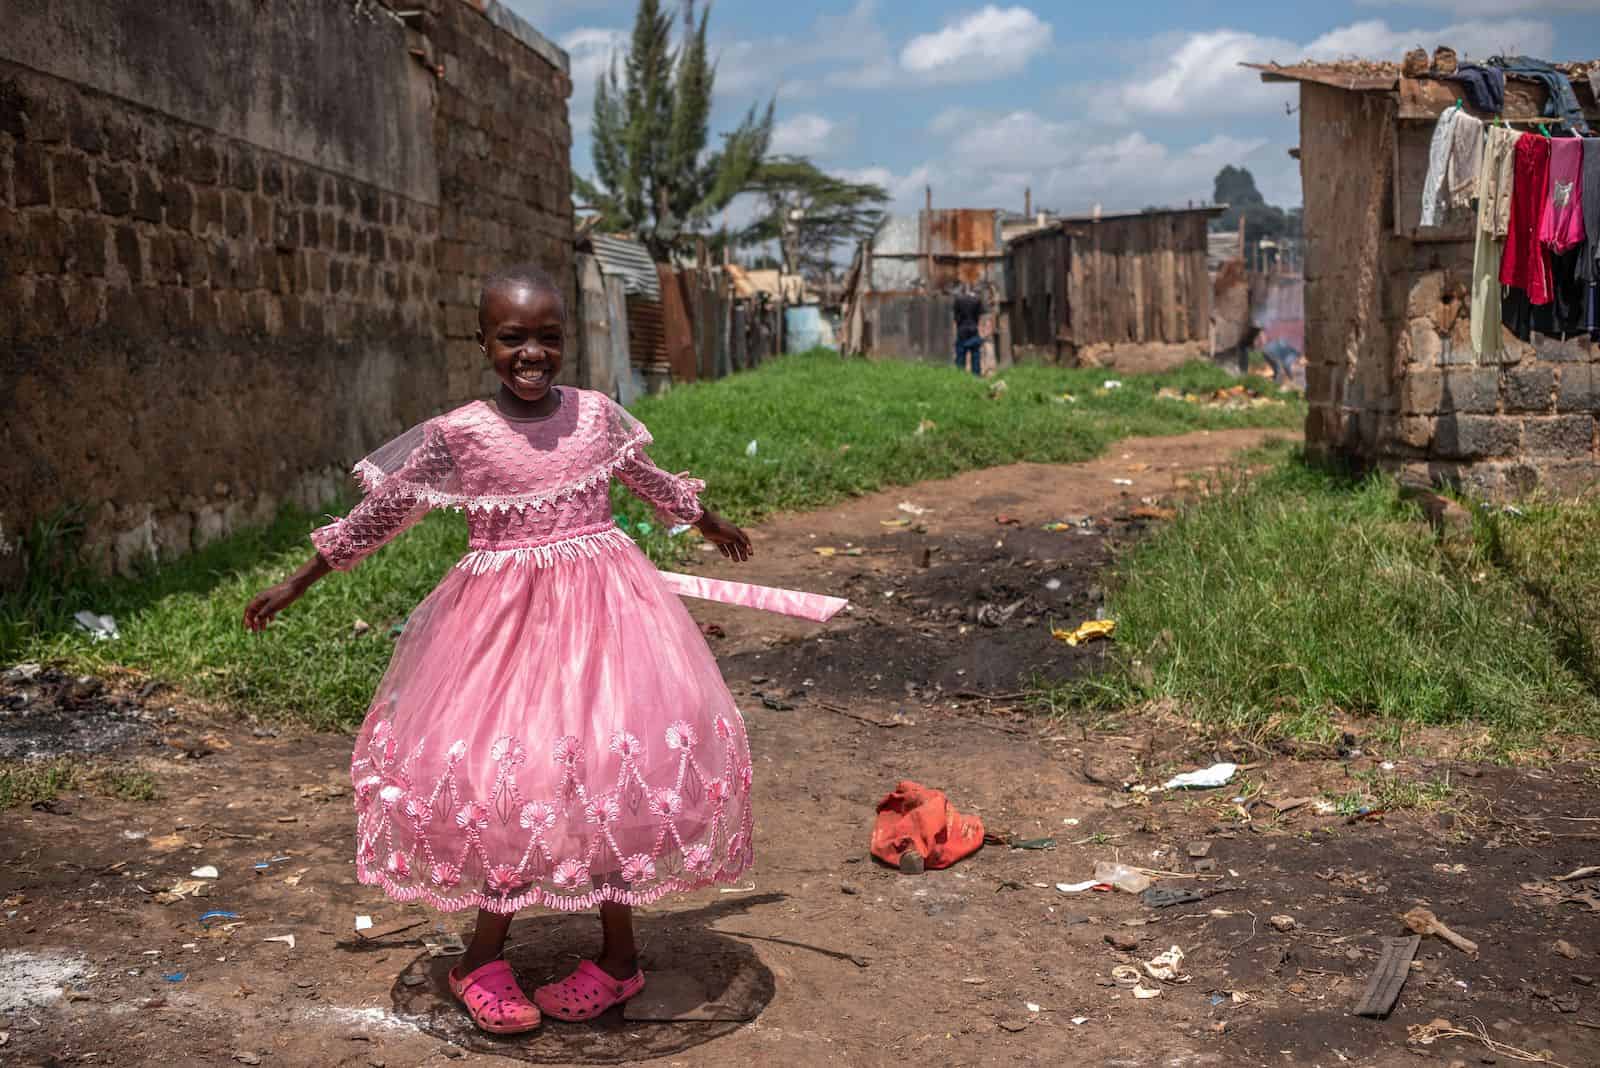 A girl spins in a pink dress, standing on a dirt path in front of a shanty home with laundry hanging on a line.